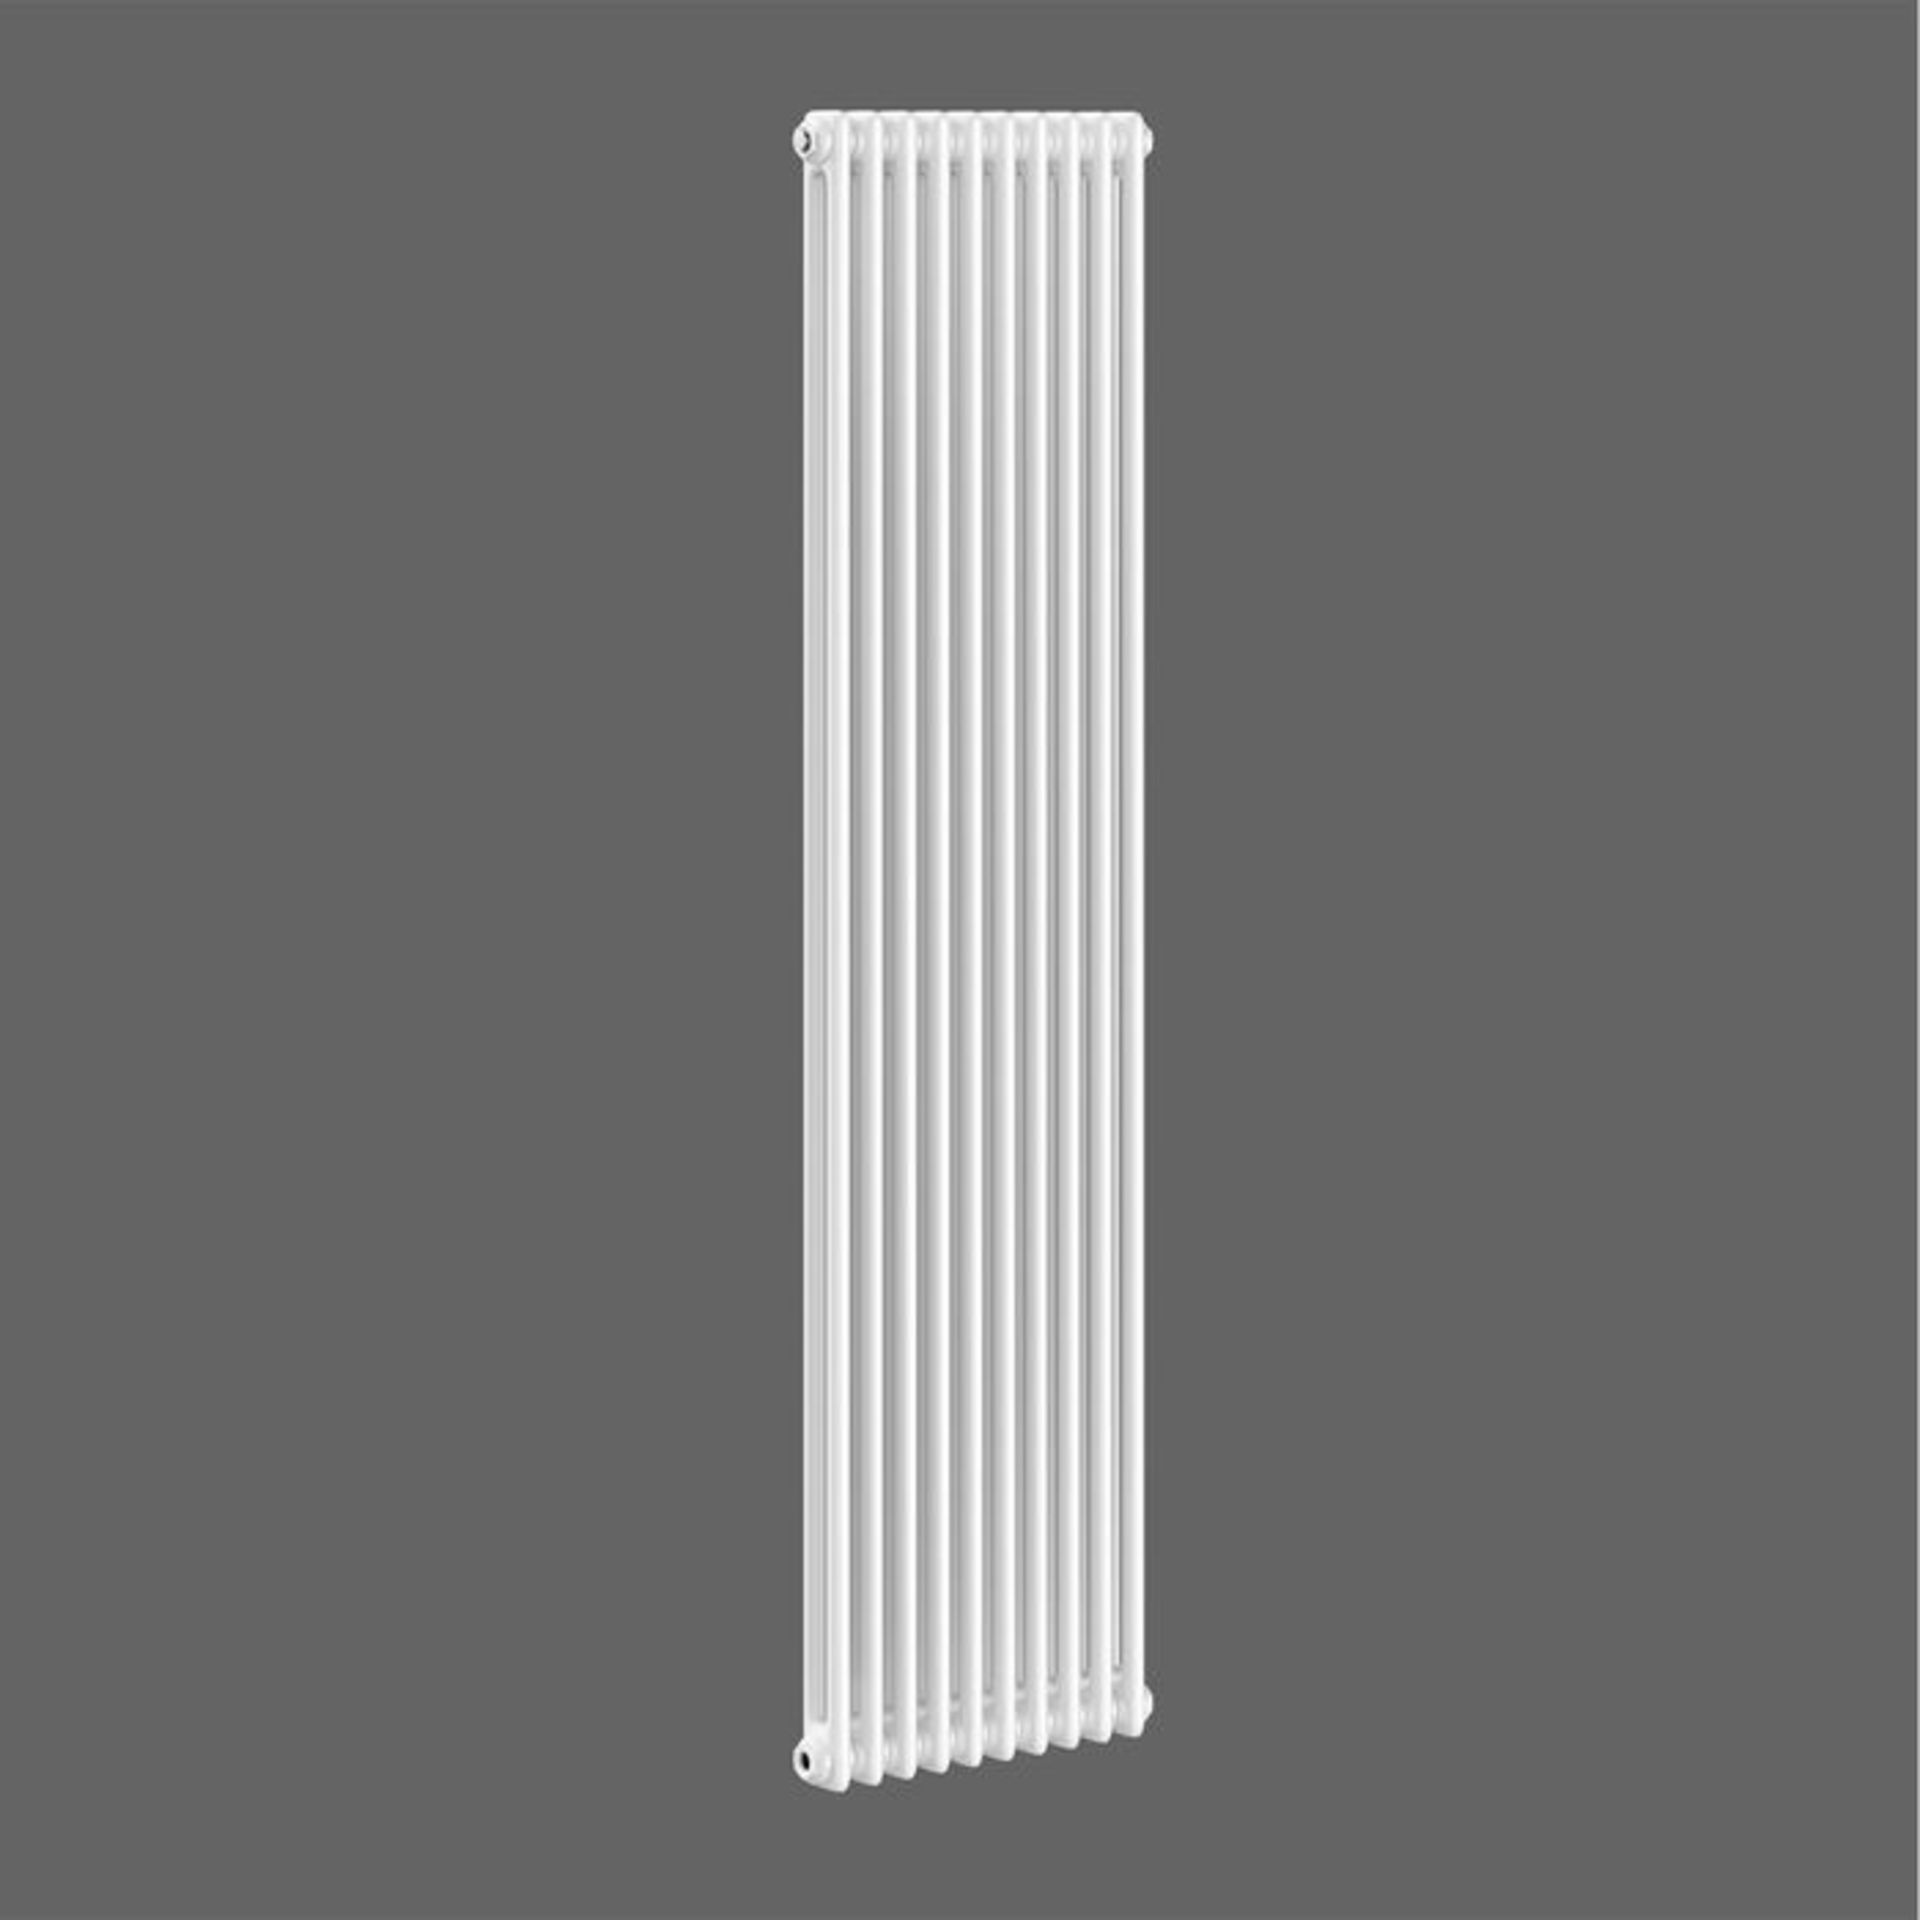 (PP134) 2000x490mm White Double Panel Vertical Colosseum Traditional Radiator. RRP £488.99. MadeFrom - Image 7 of 8